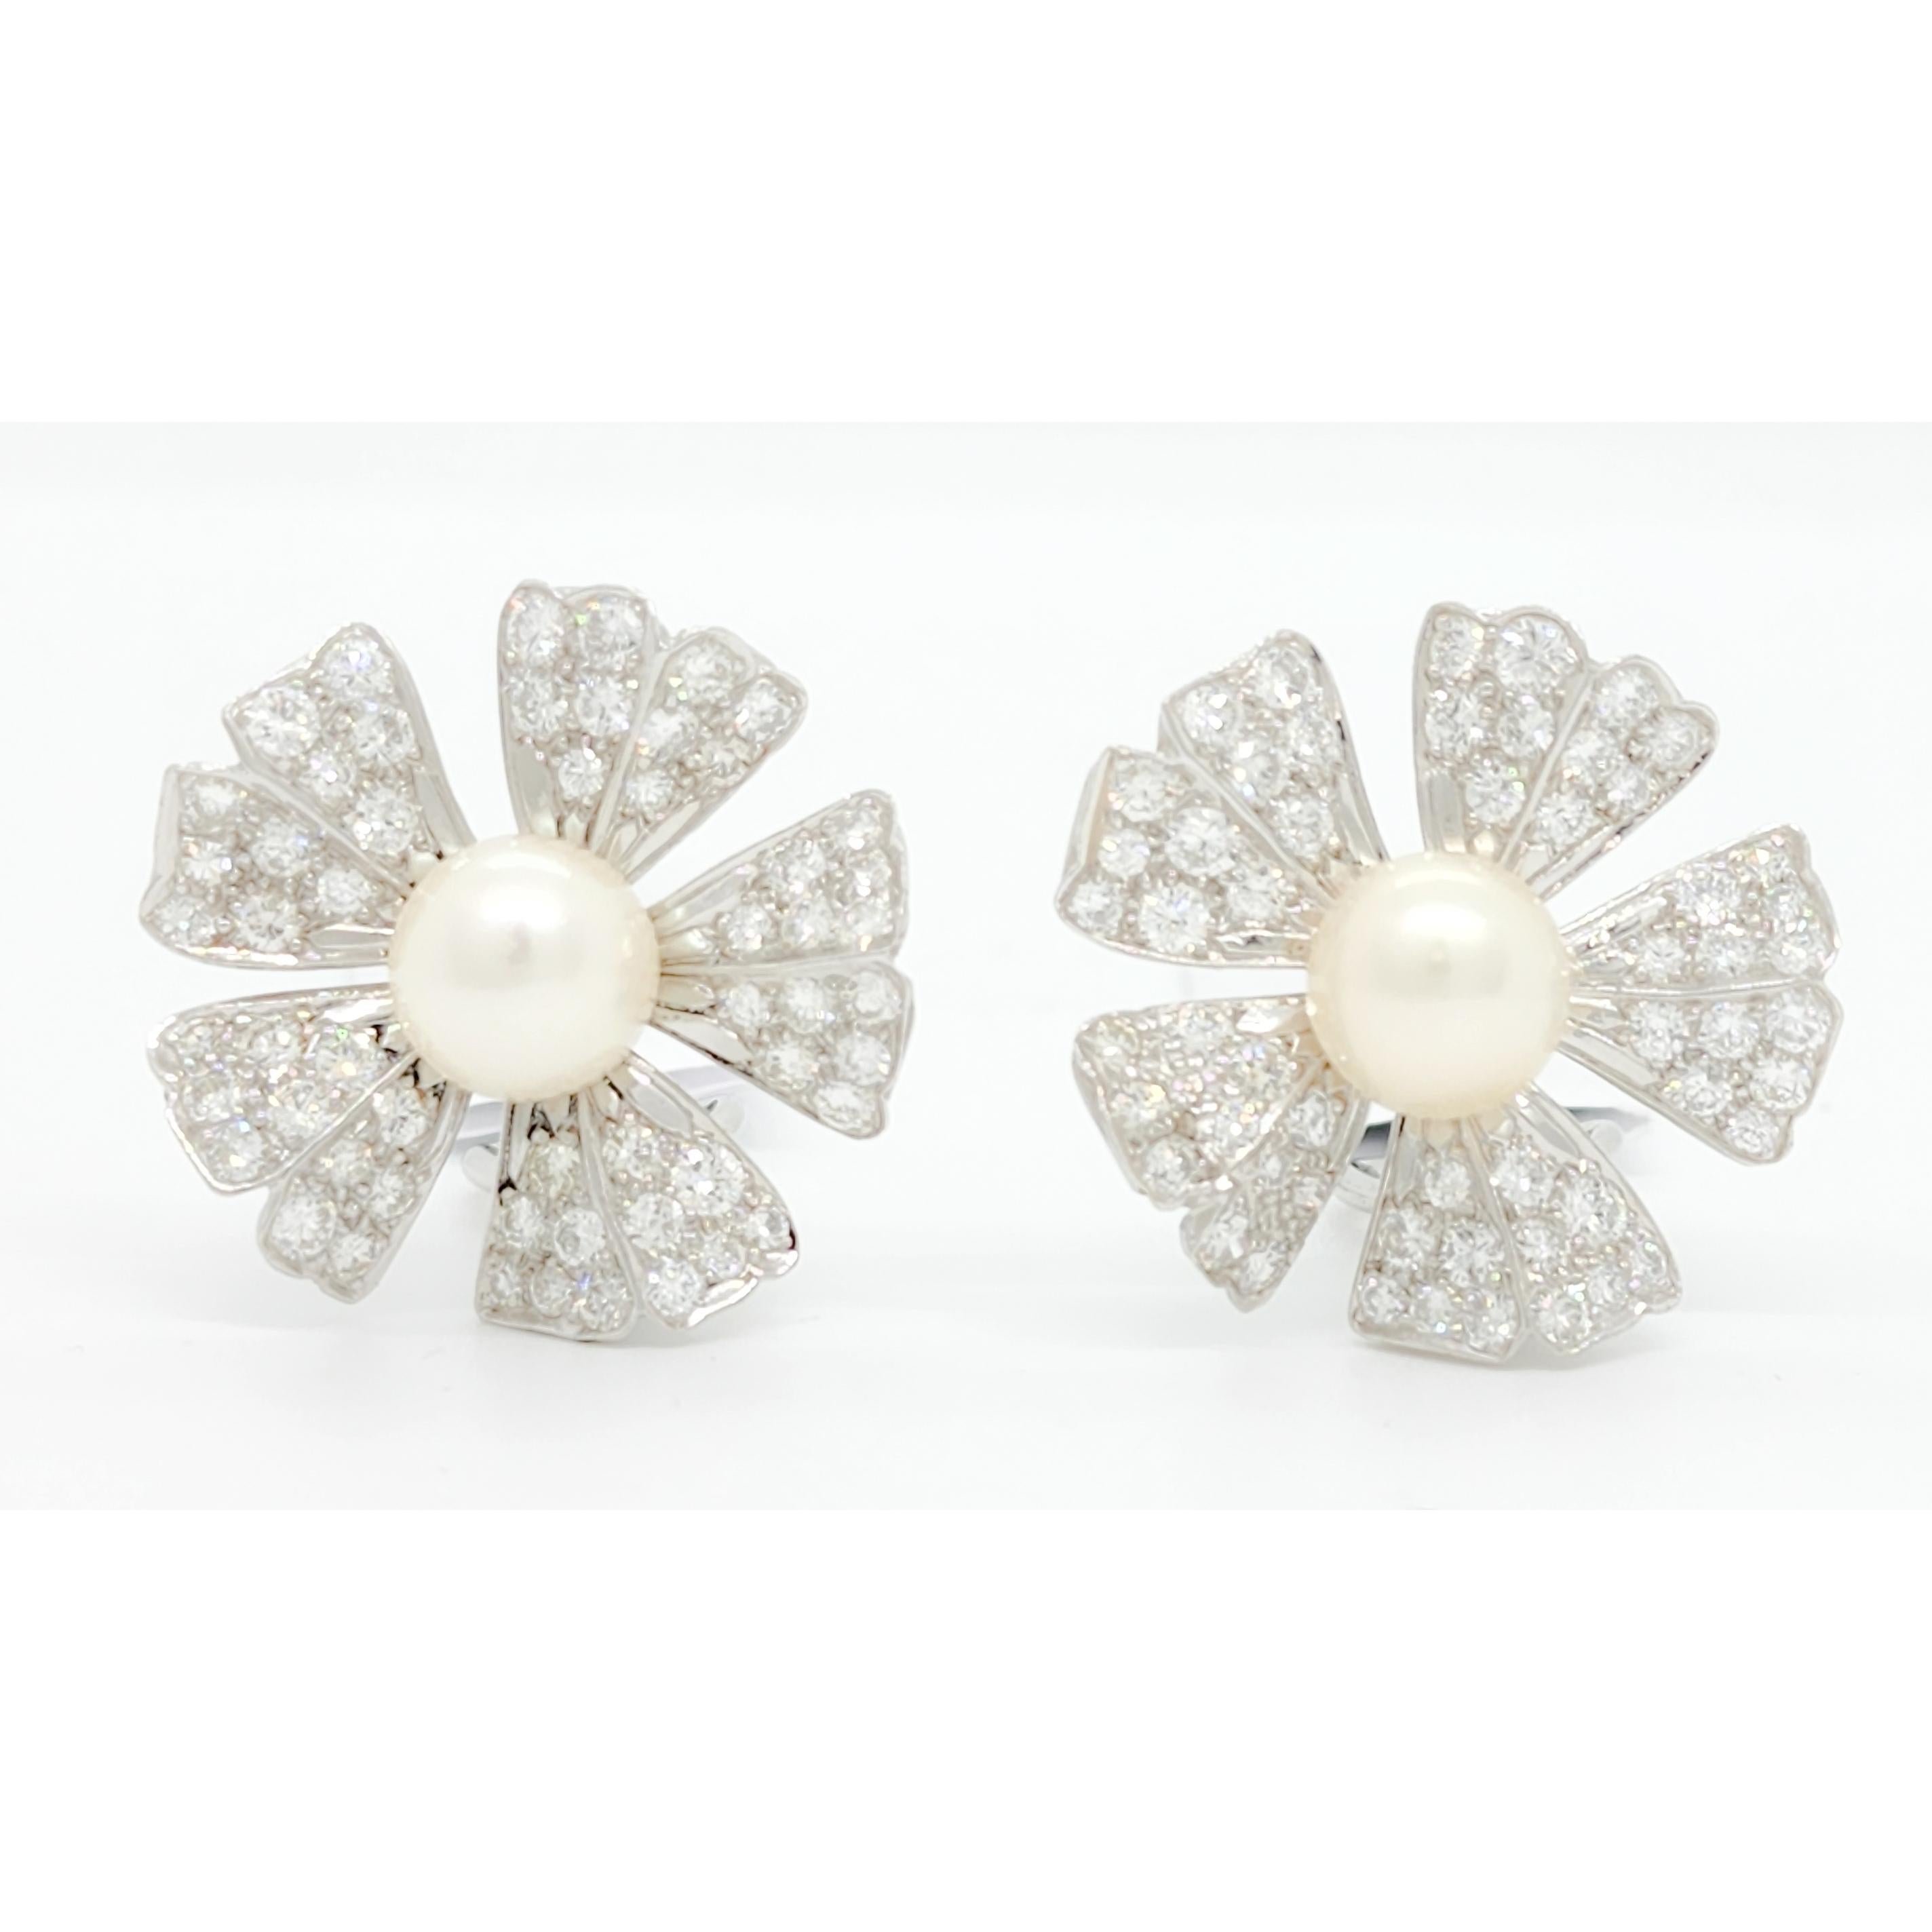 Beautiful white pearl round and diamond round earrings with omega backs.  Handmade with attention to detail.  Approximately 1.00 ct. of good quality, bright, and white diamonds.